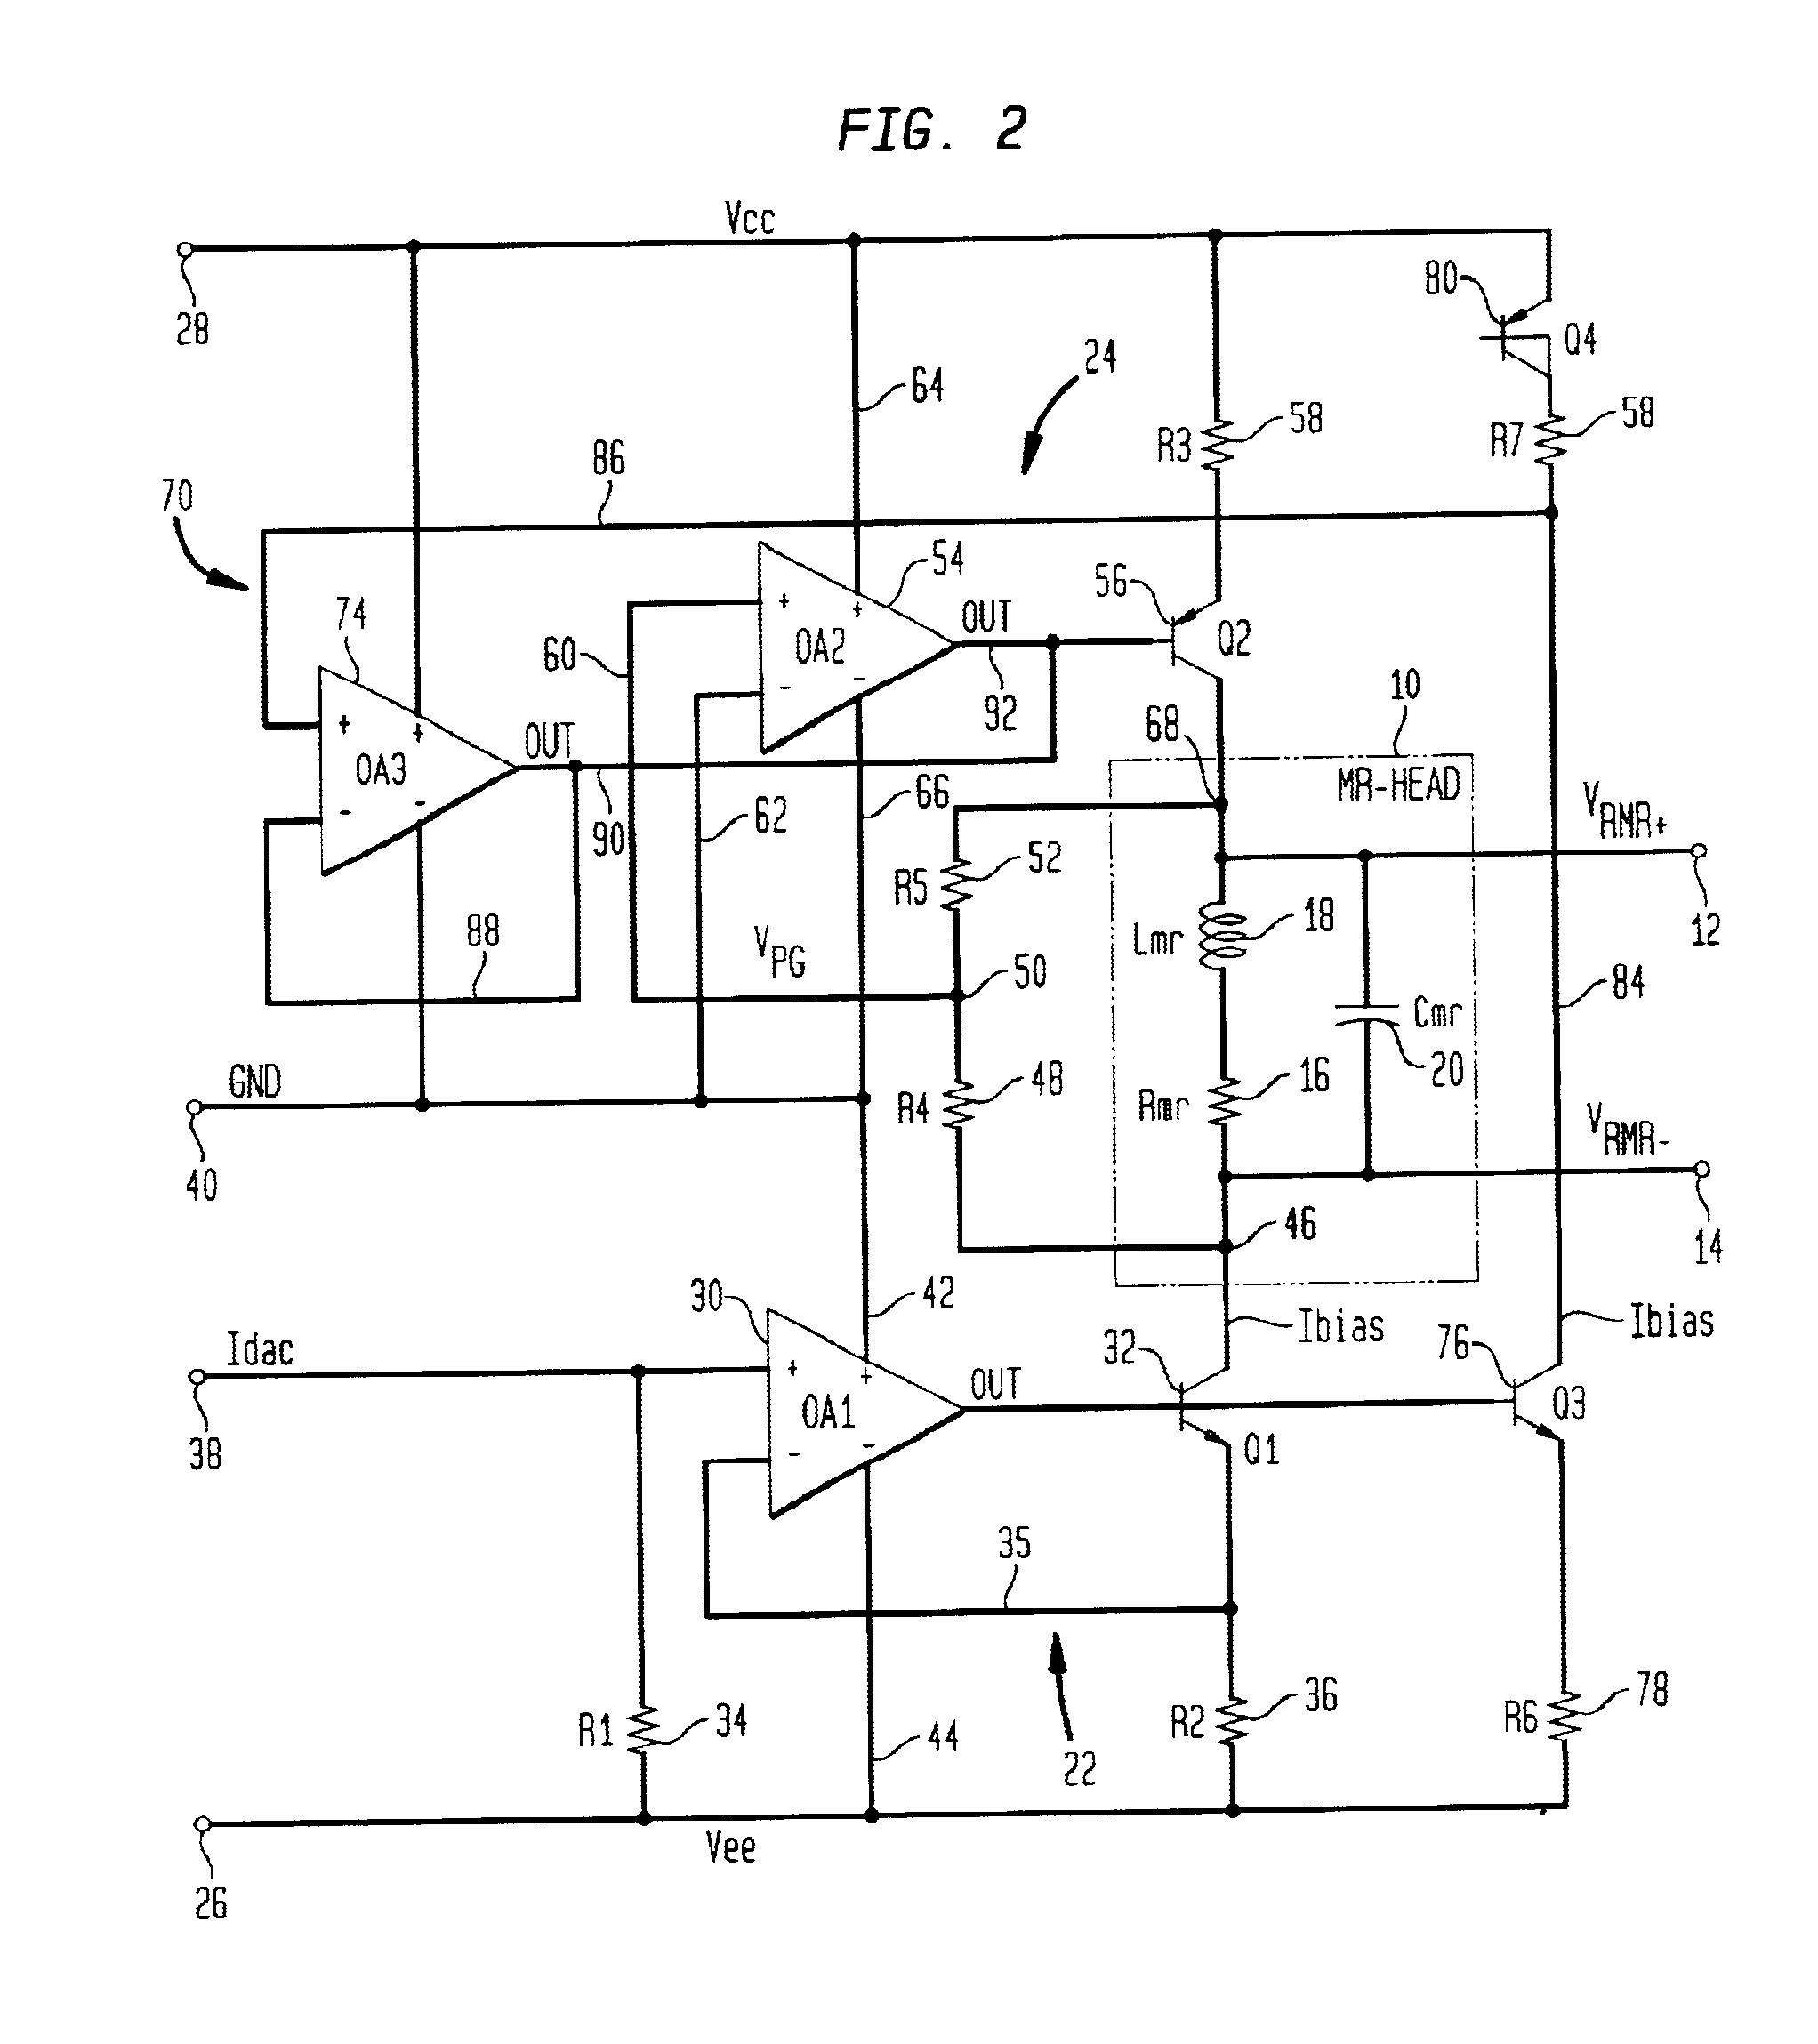 Current limiter for magneto-resistive circuit element